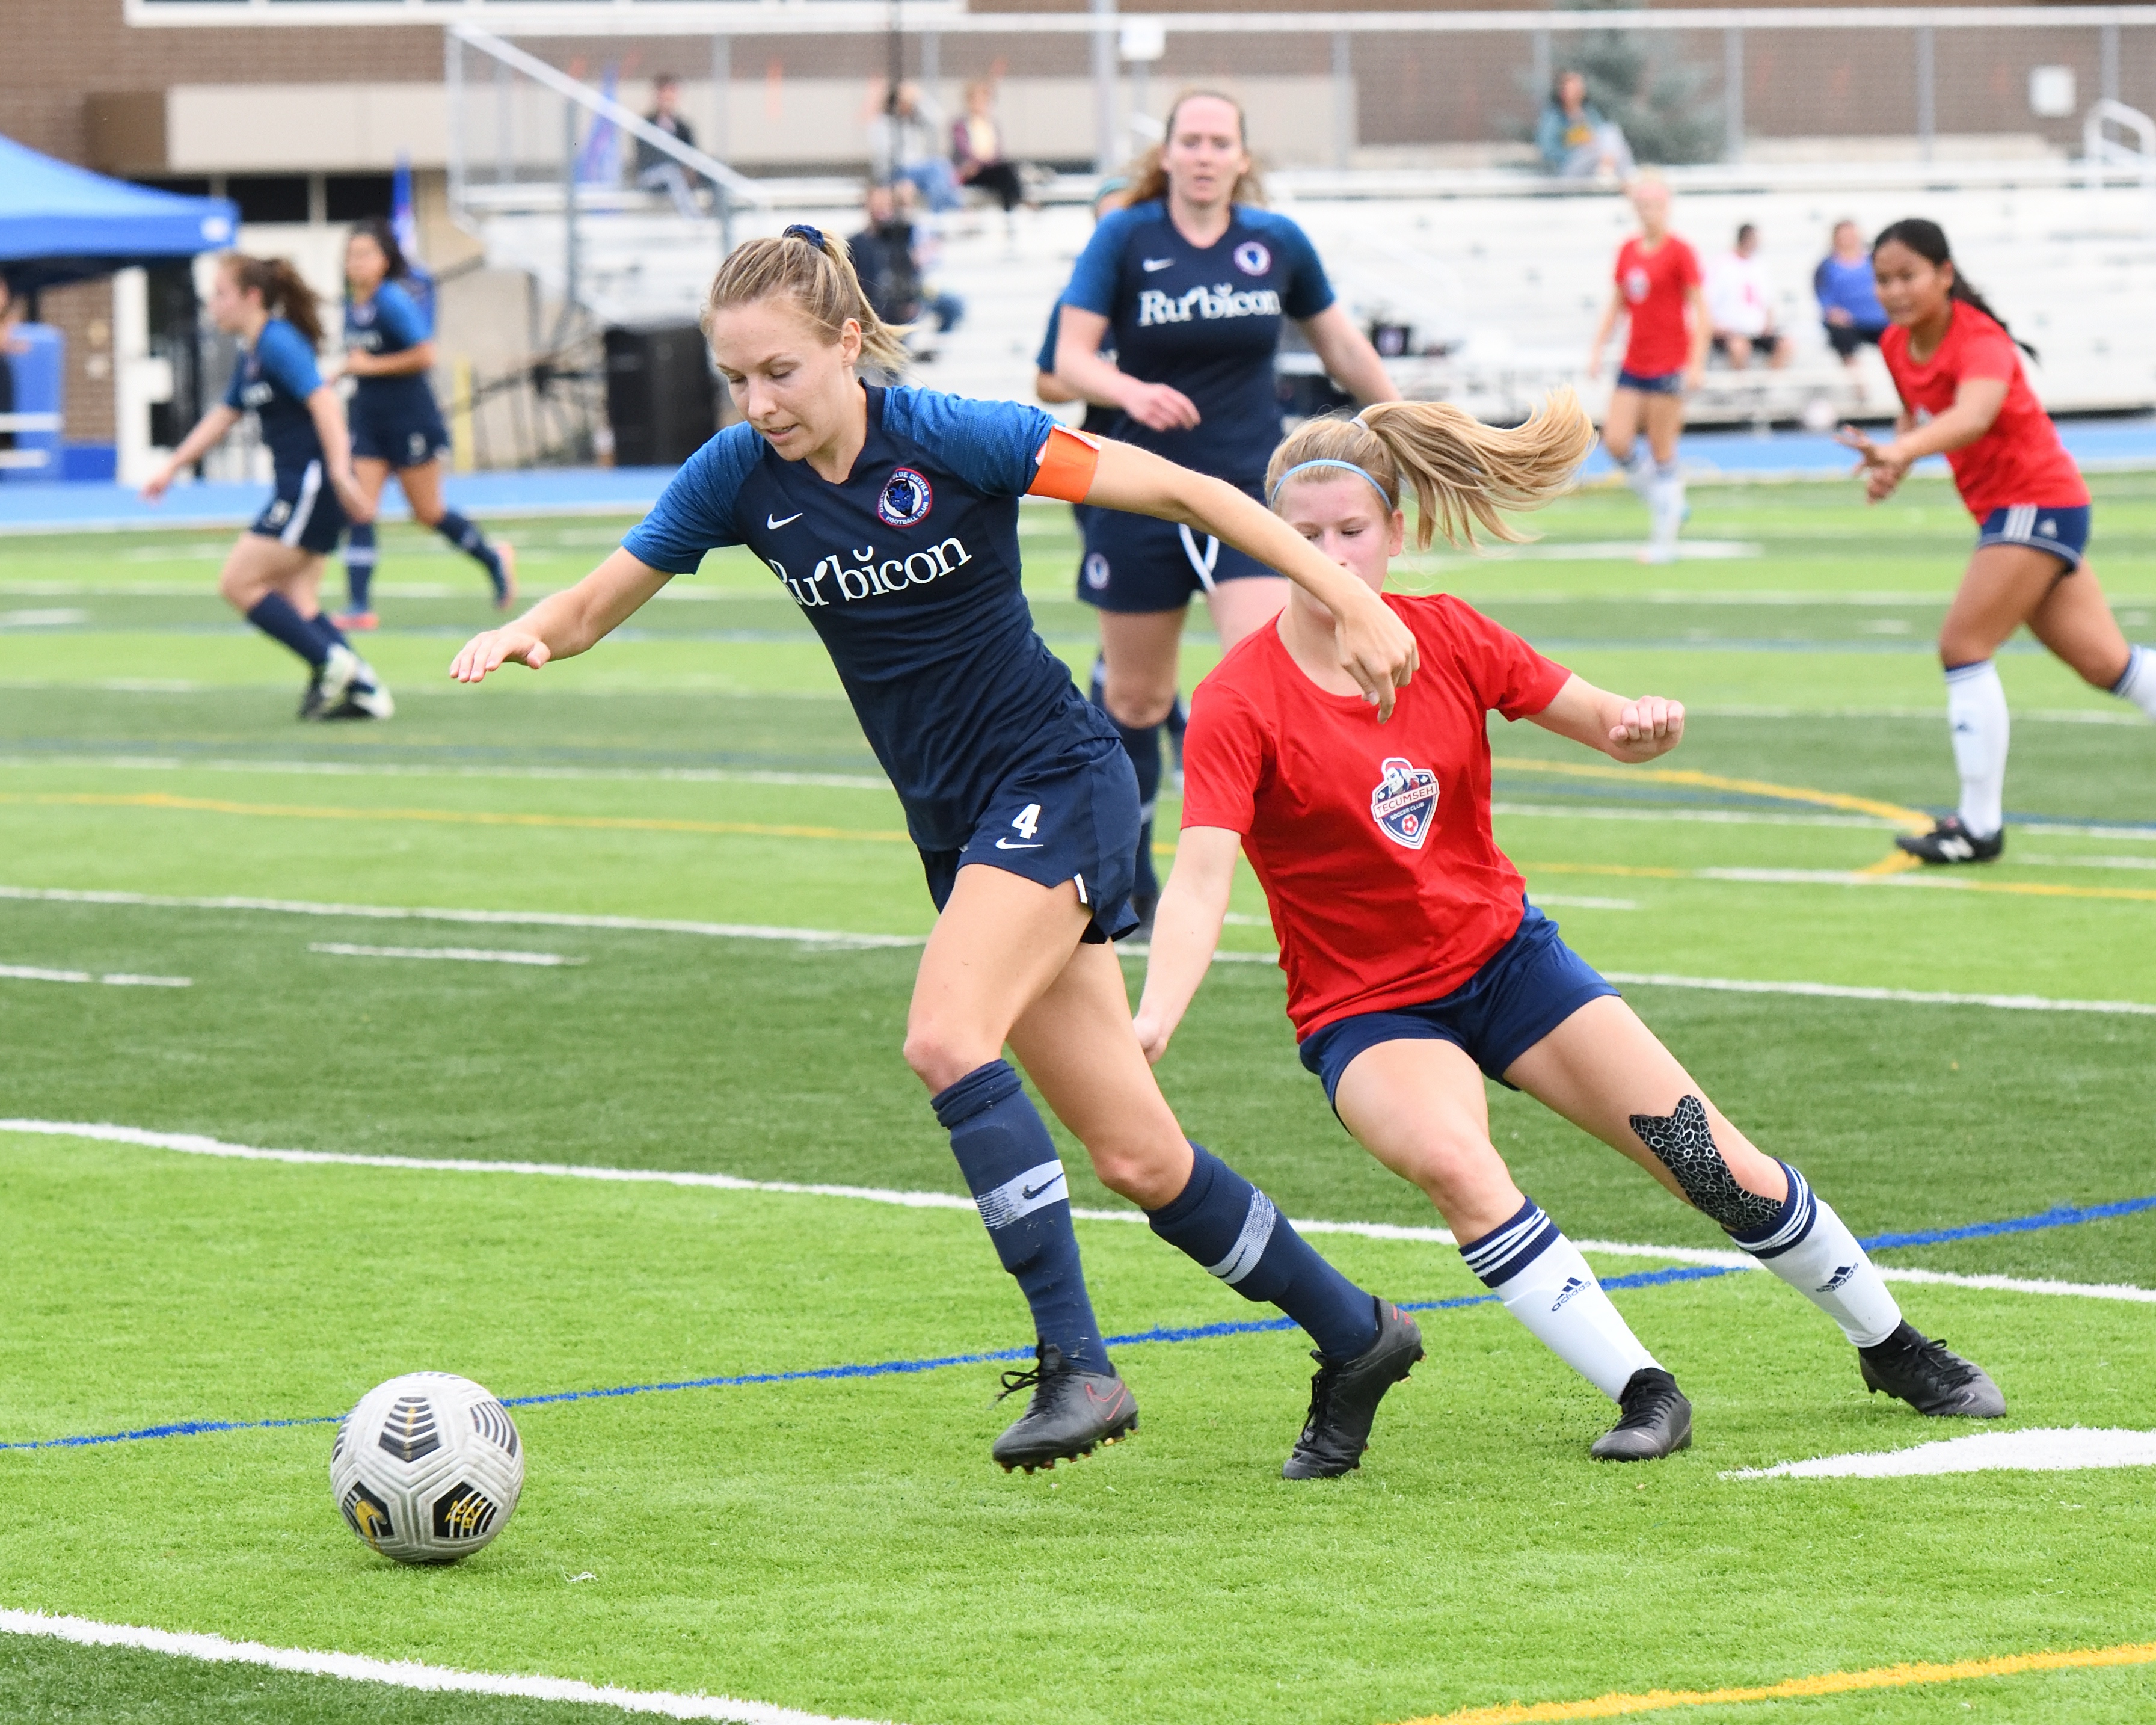 Laura Twidle | Blue Devils FC Captain Laura Twidle has been named League1 Ontario